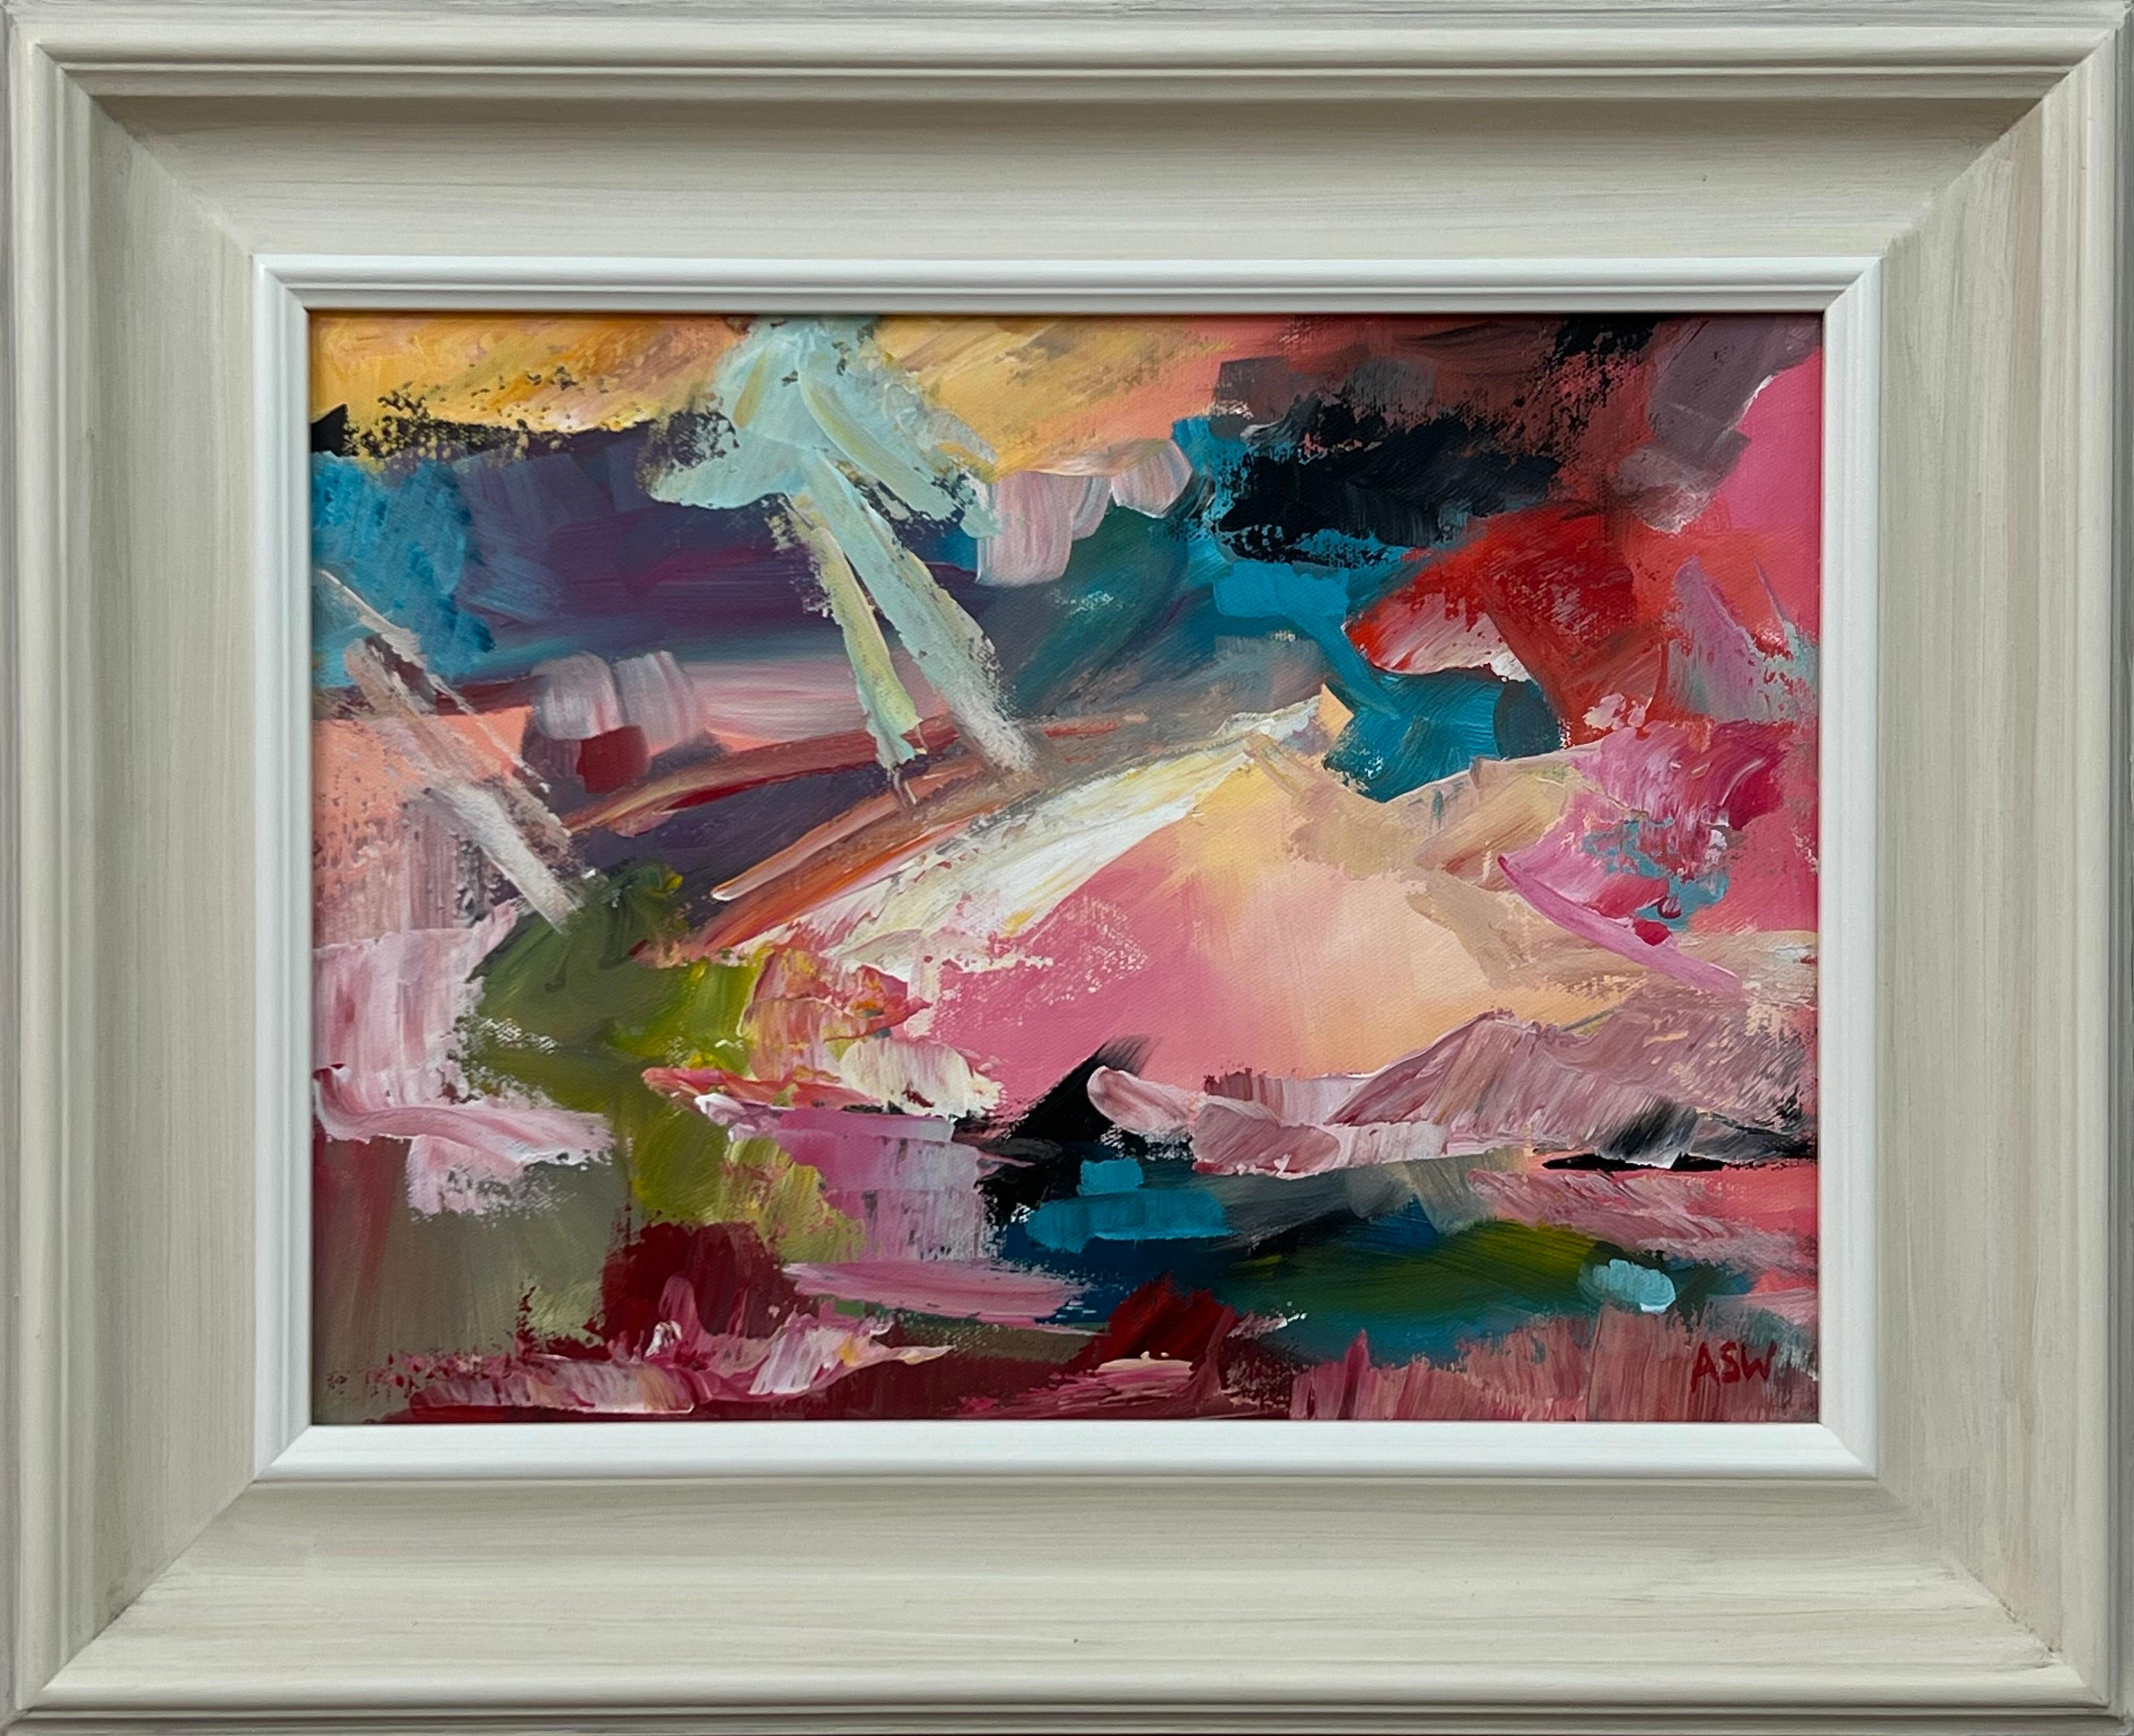 Pink & Turquoise Abstract Expressionist Painting by Contemporary British Artist